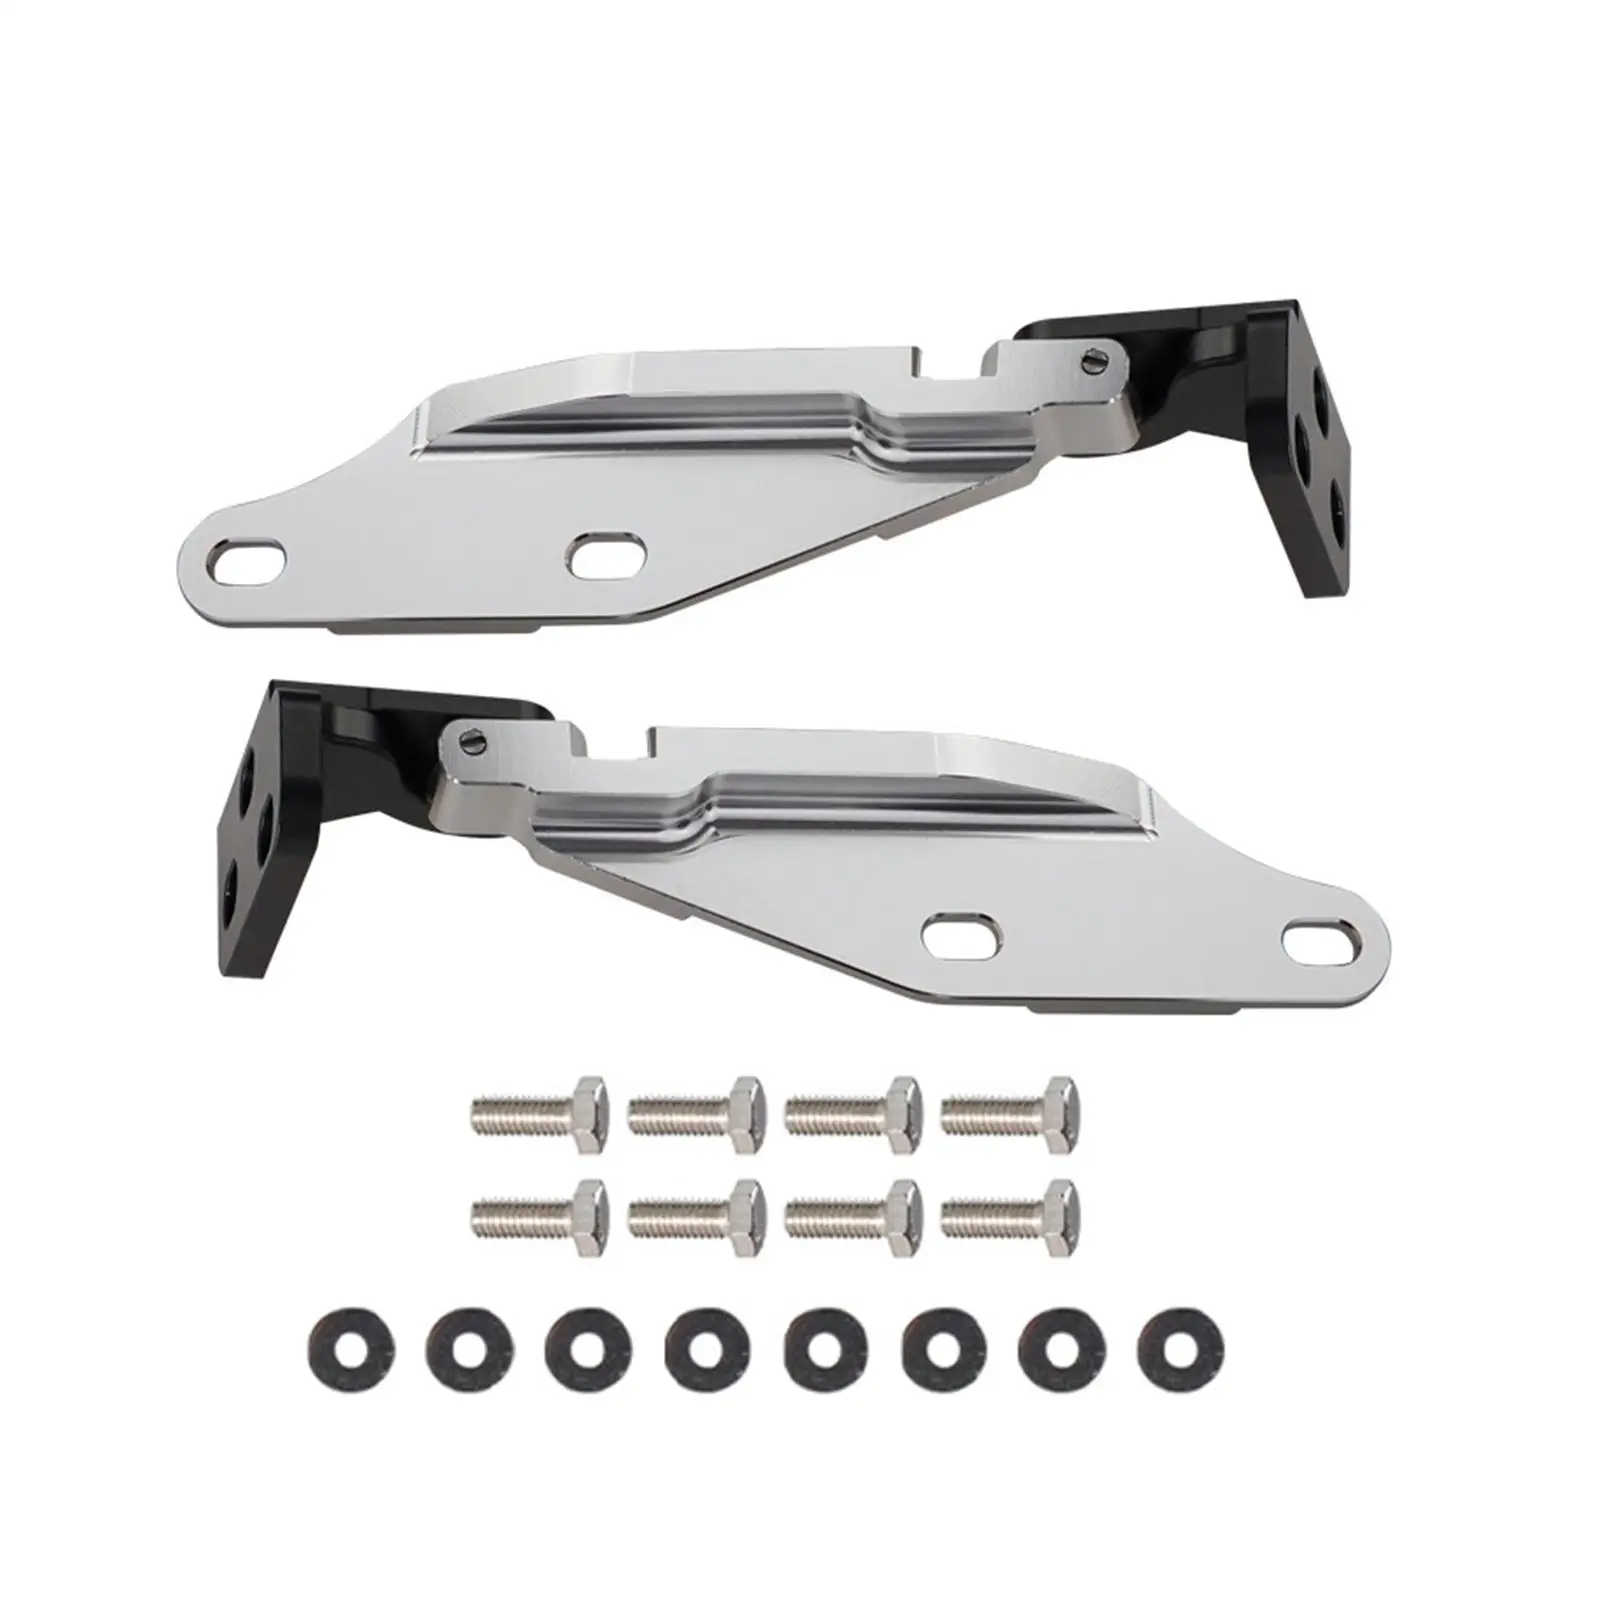 2 Pieces Quick Release Hood Hinge Automotive Easy to Install Spare Parts for Honda Civic Type R DC2 EK Acura Replaces